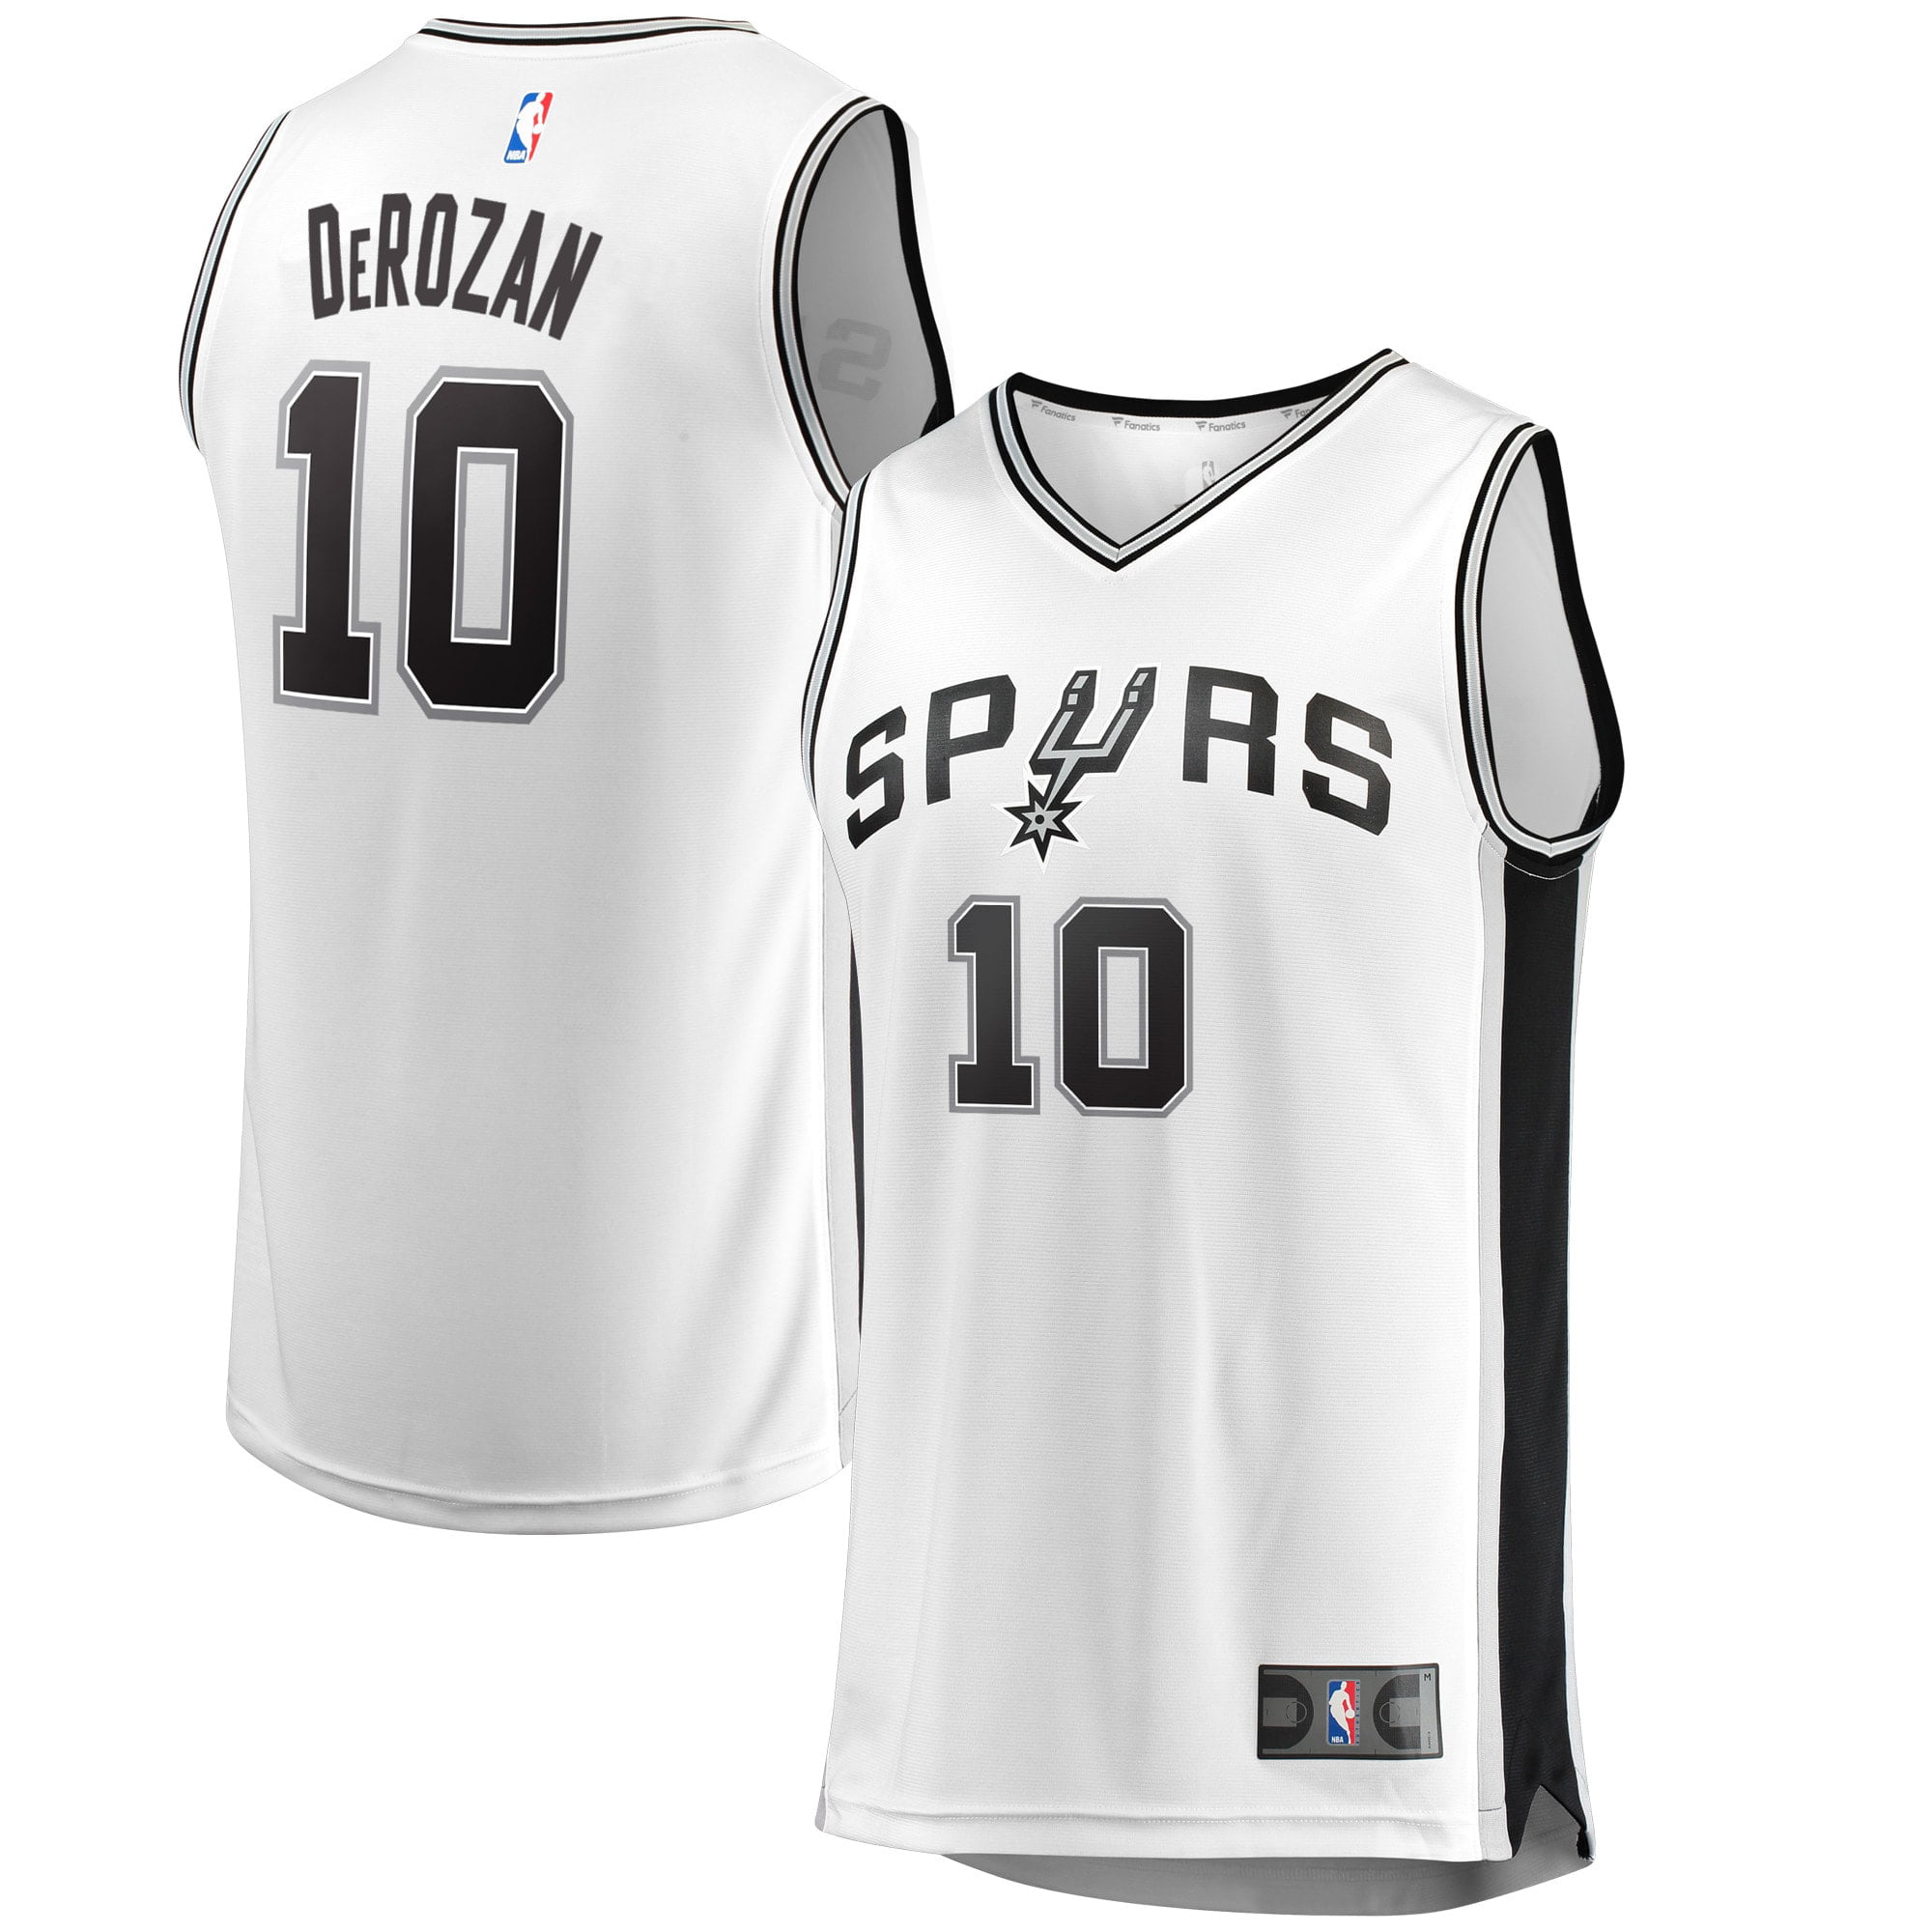 spurs white jersey